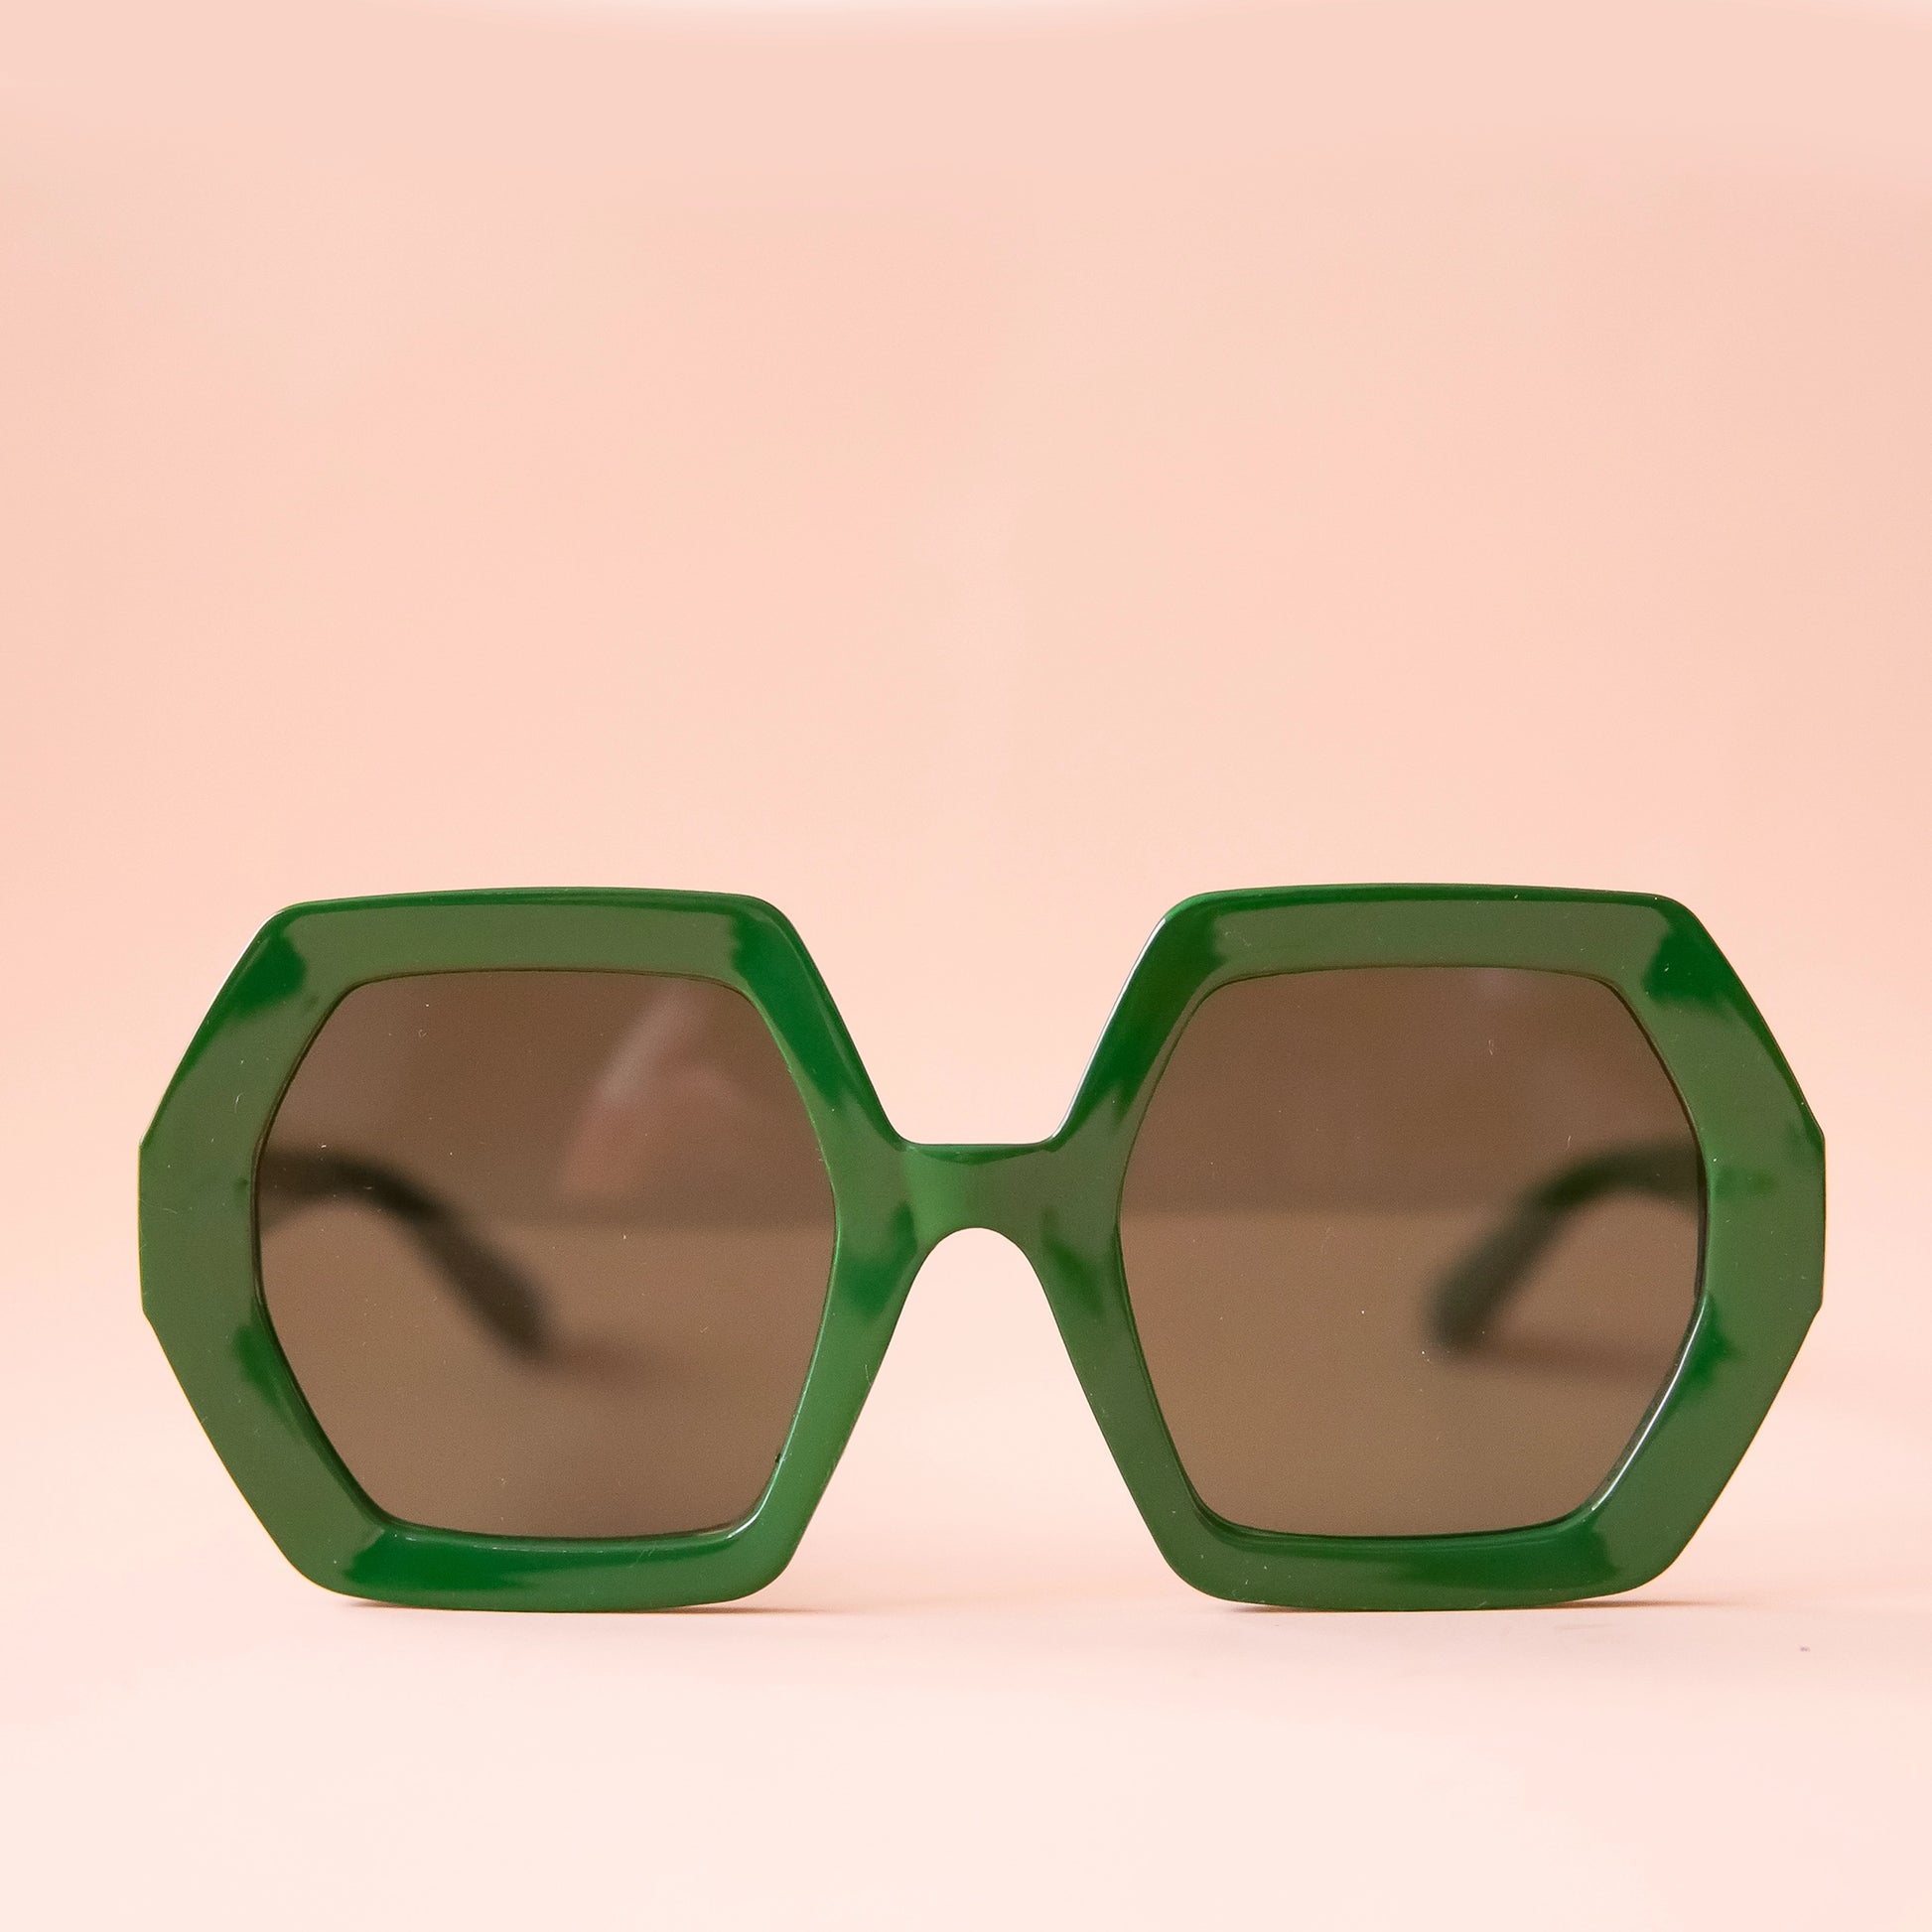 On a peachy background is a pair of hexagon shaped plastic sunglasses in an emerald green color with a dark brown lens.